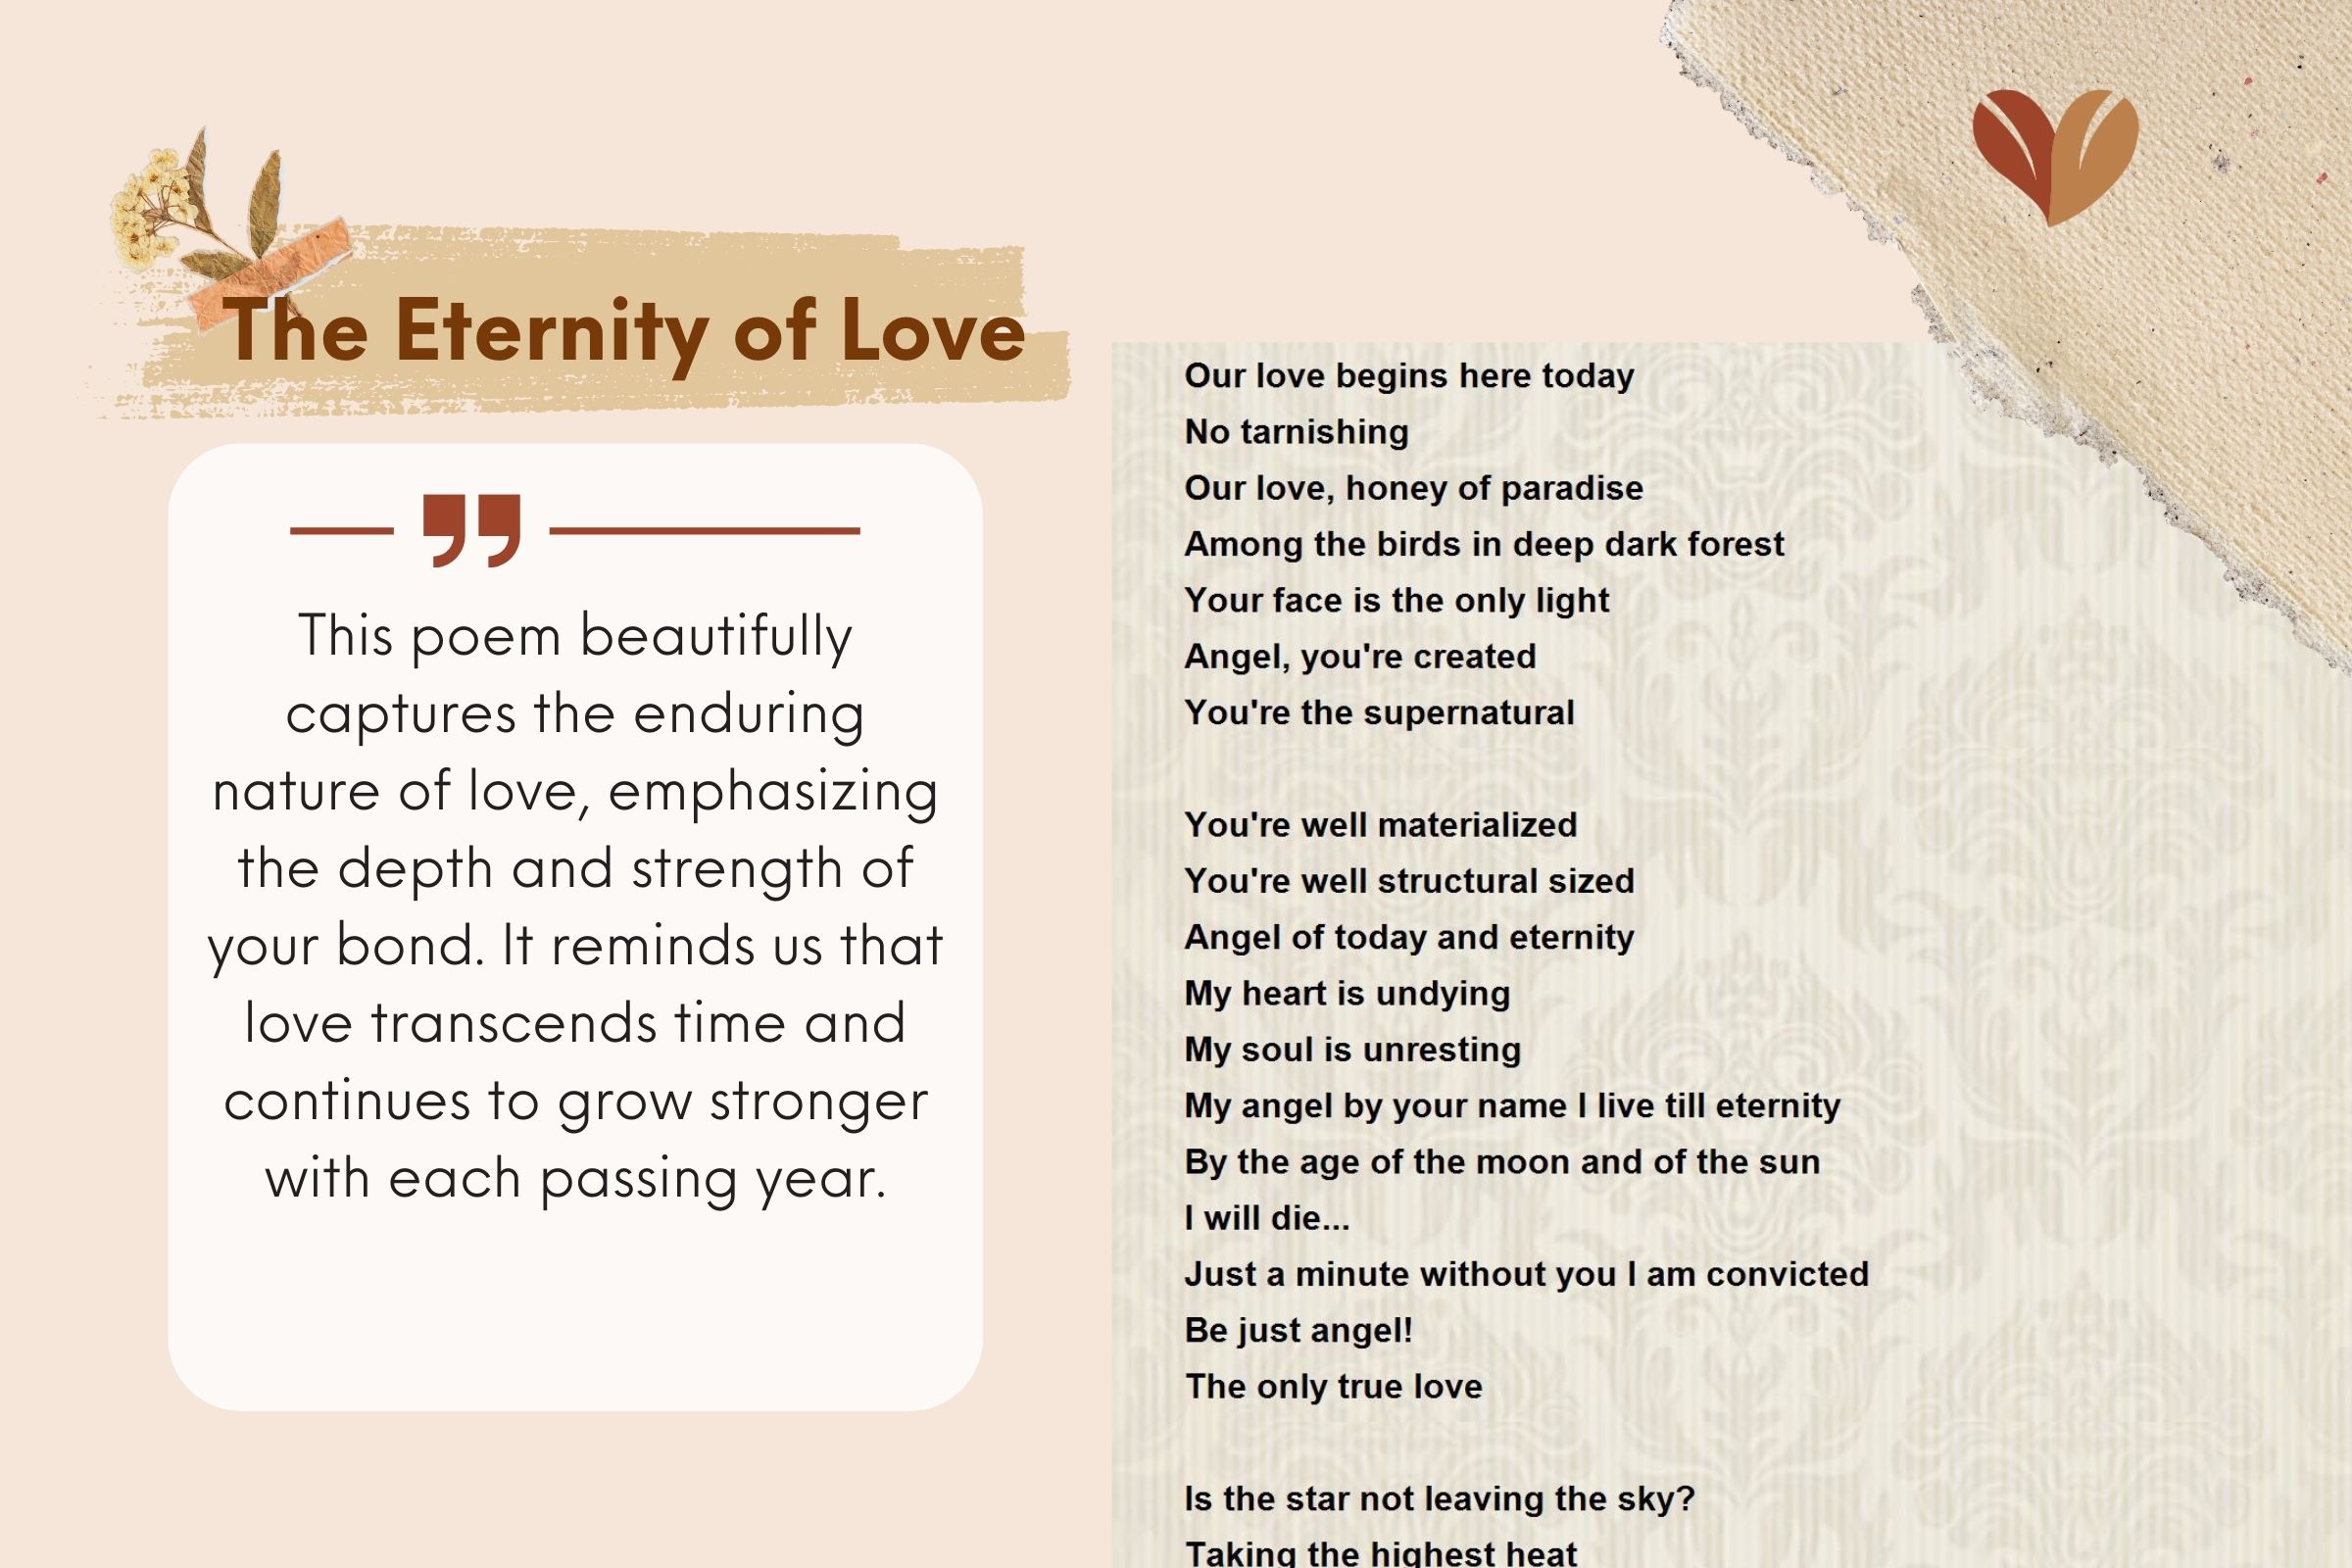 The Eternity of Love is one of the anniversary gift ideas for her